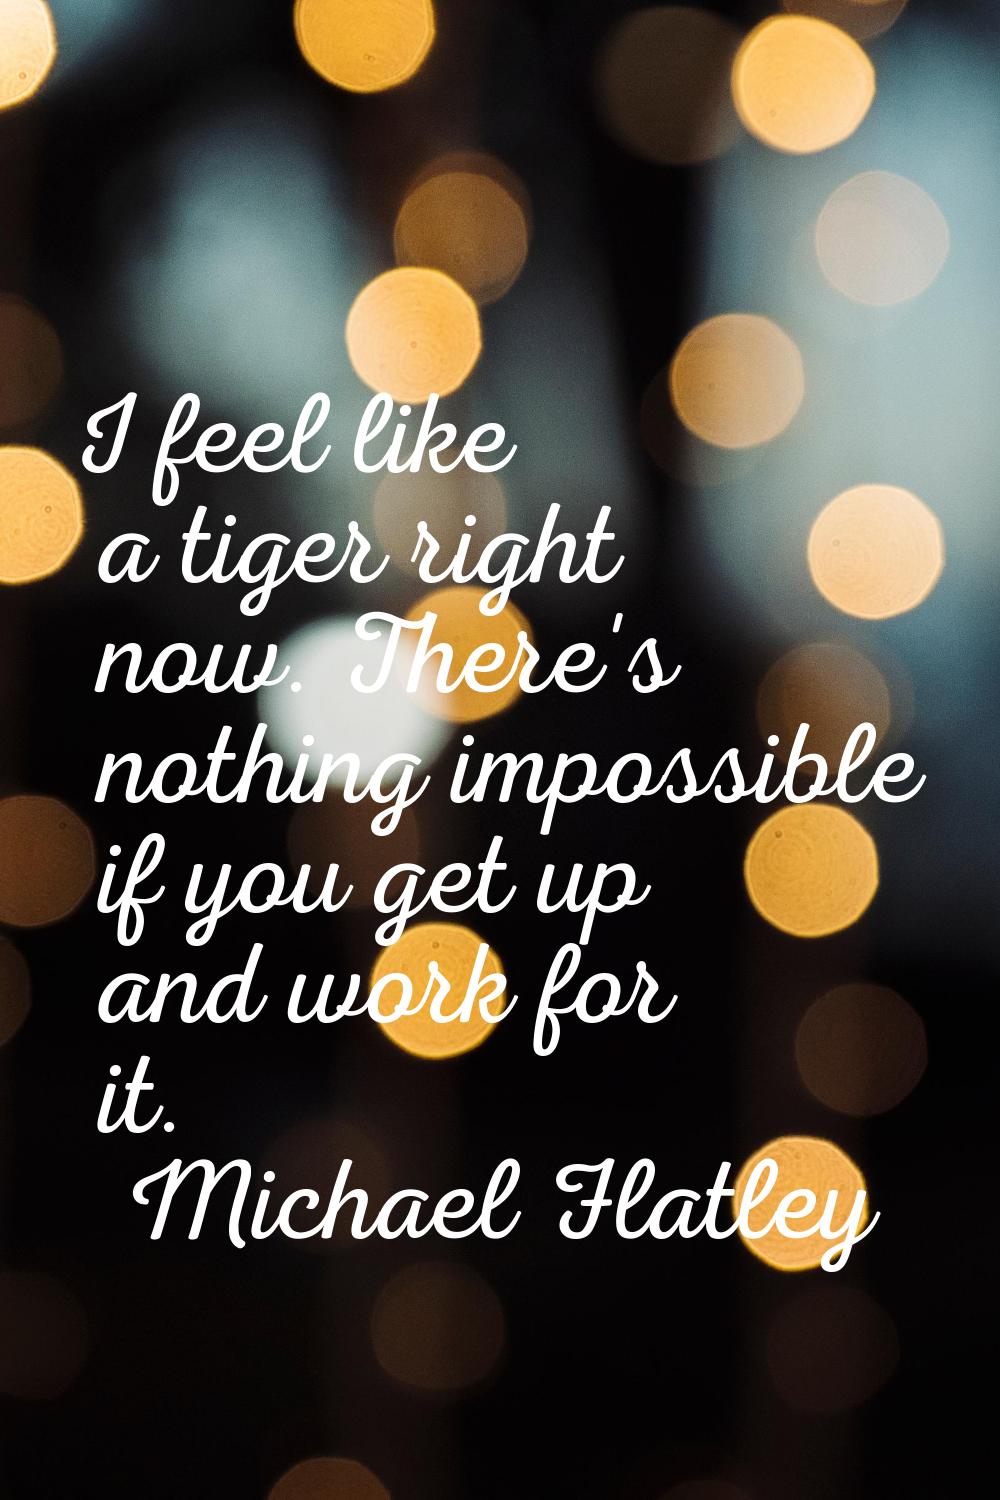 I feel like a tiger right now. There's nothing impossible if you get up and work for it.